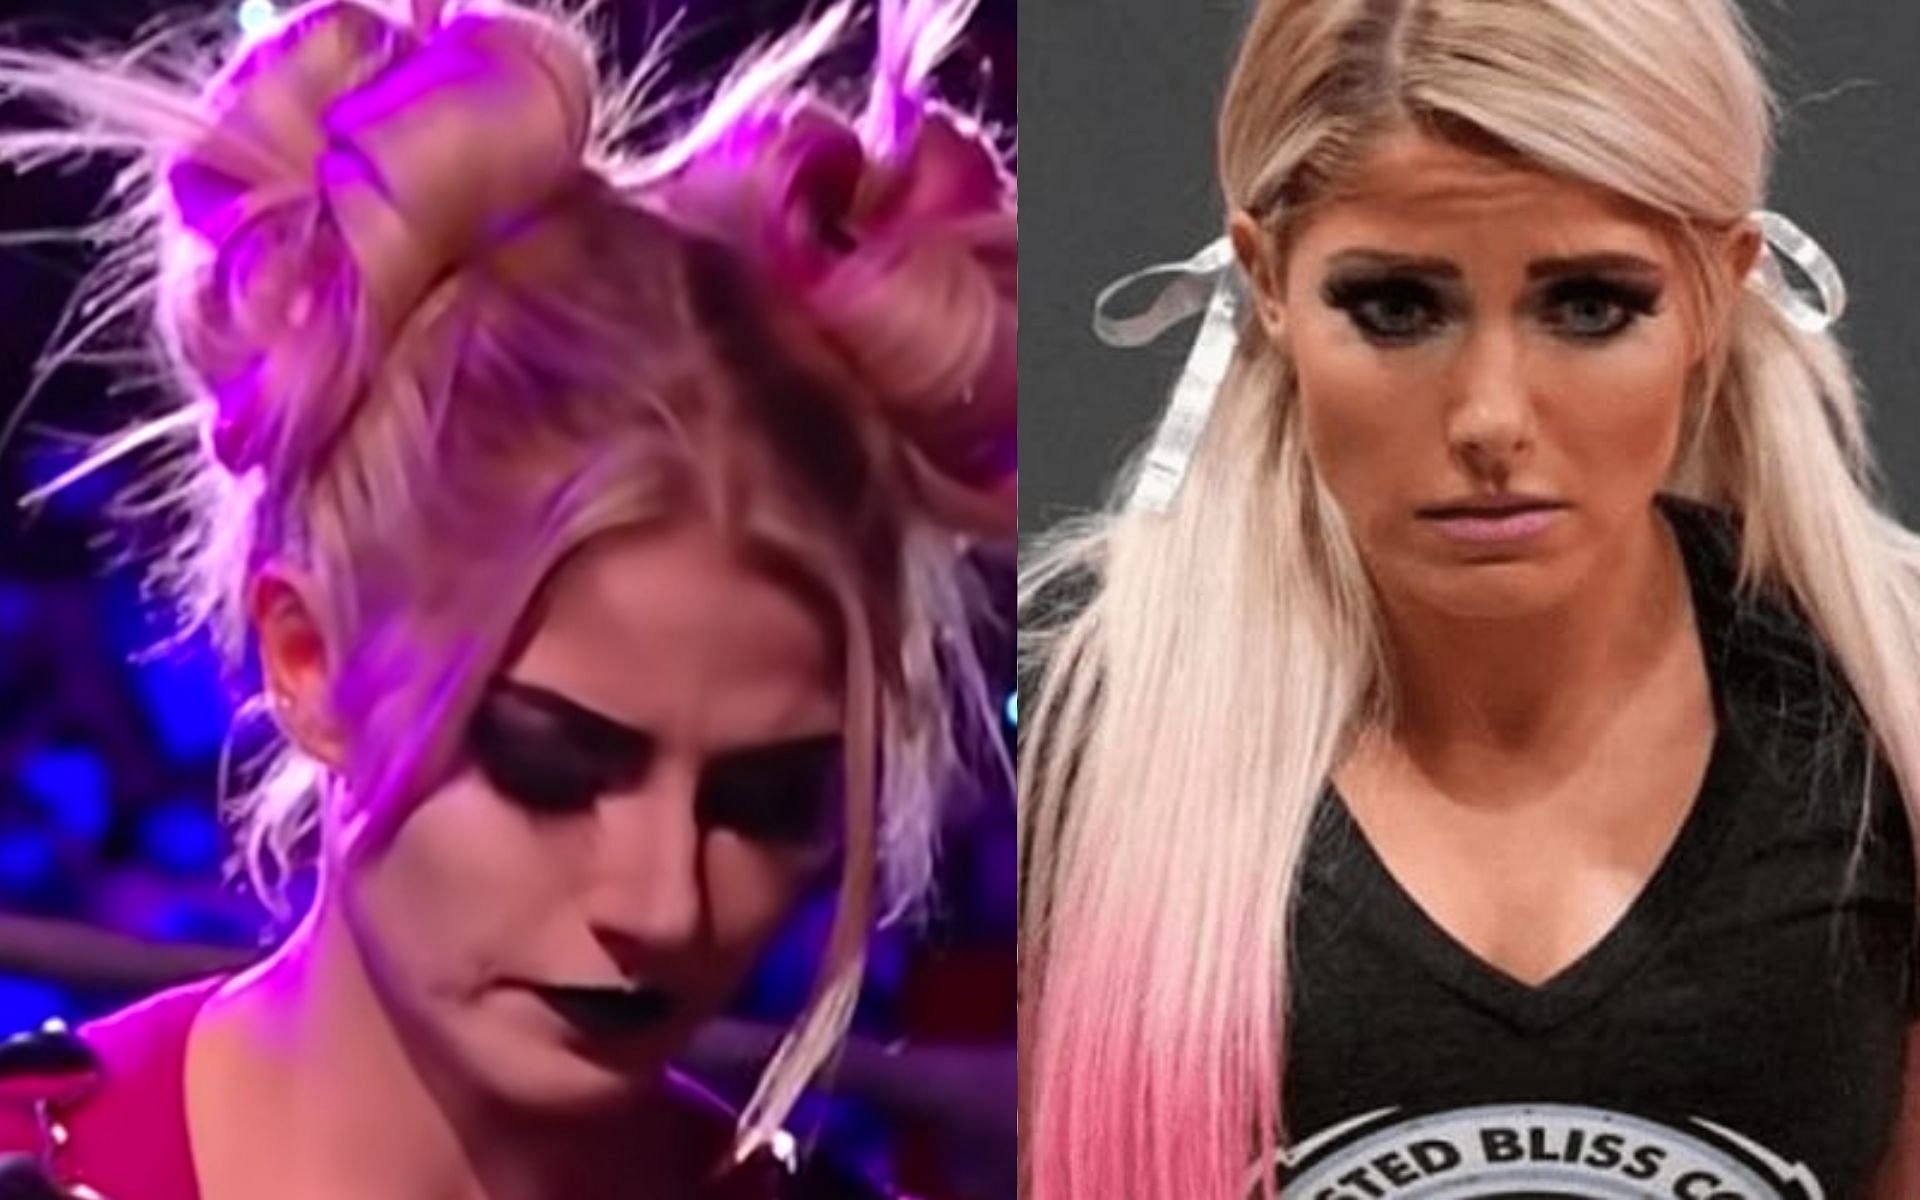 Alexa Bliss has been missing from action ever since Elimination Chamber 2022.